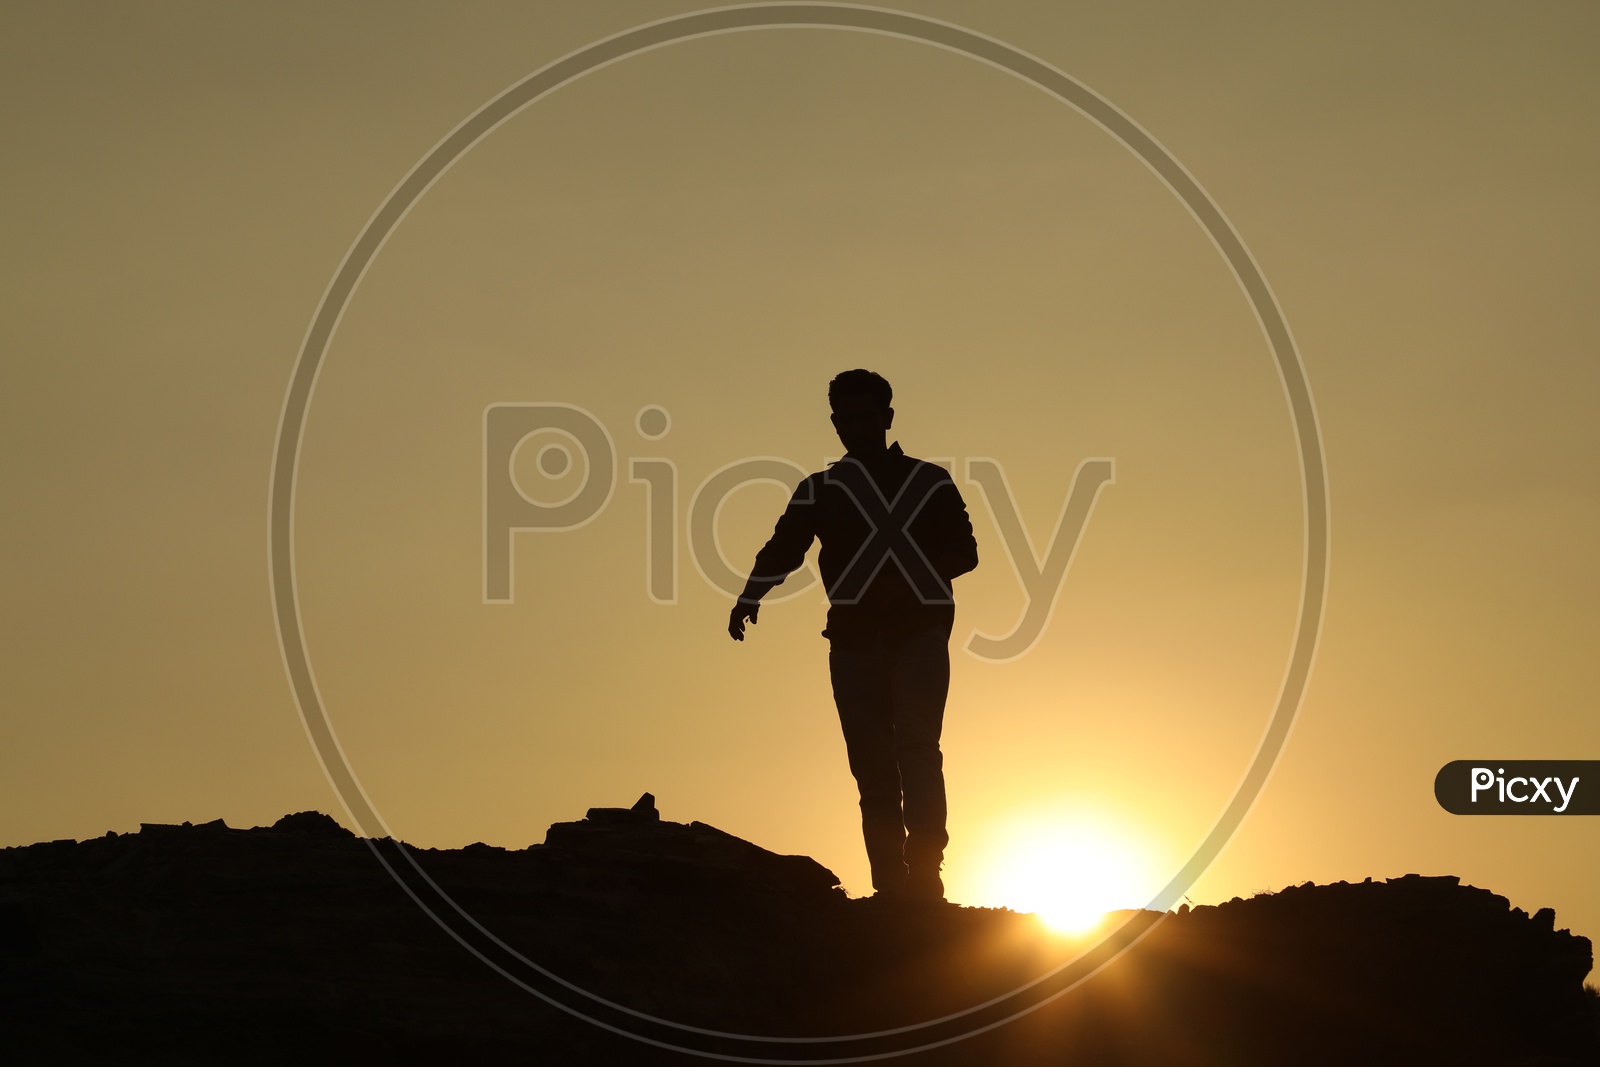 Silhouette  of a man with sun in background